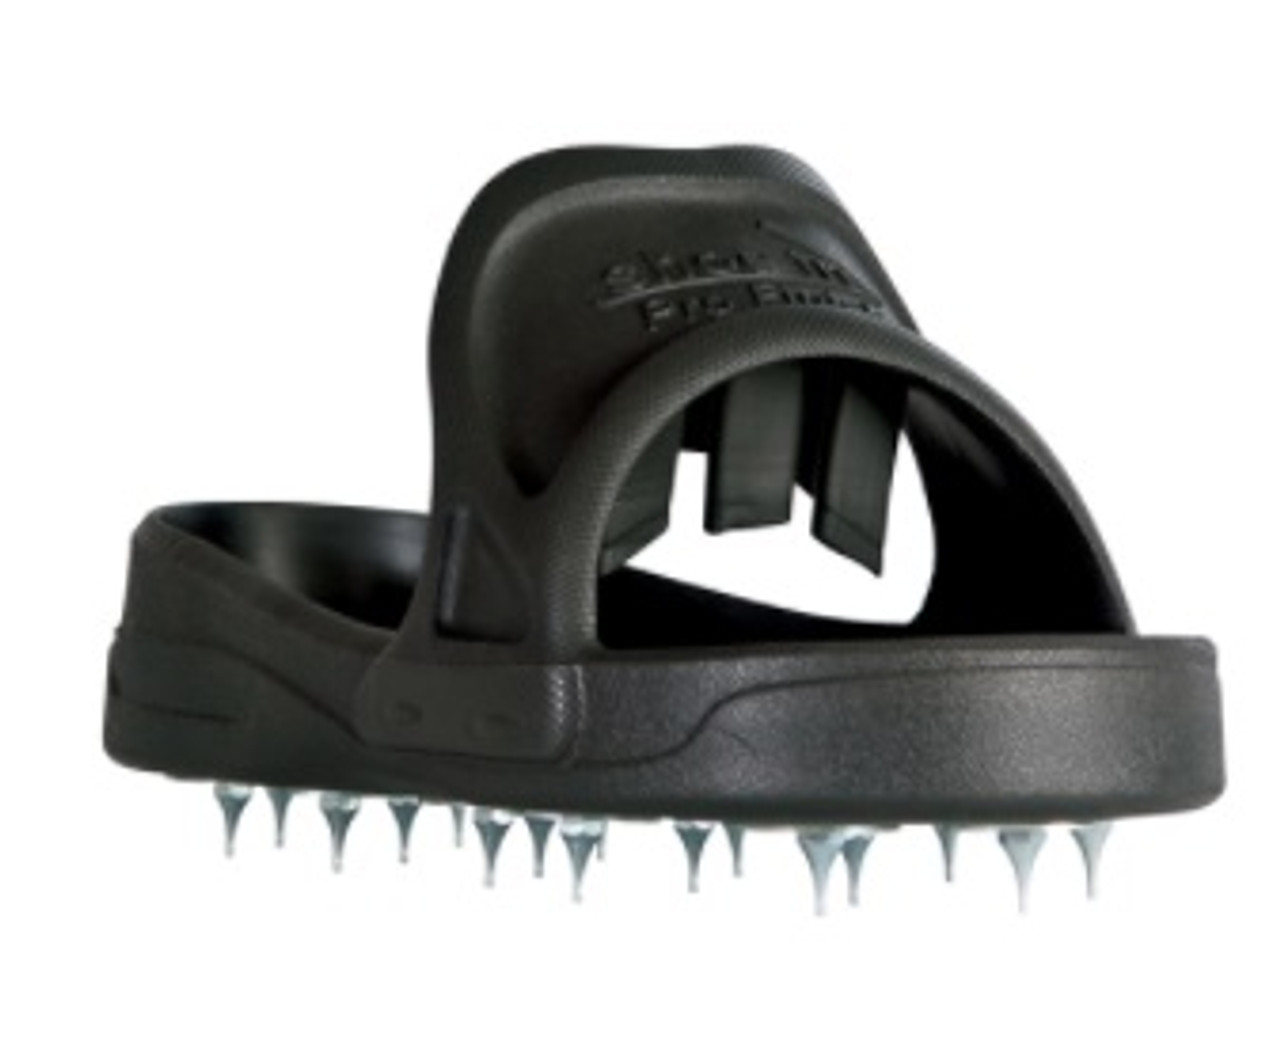 SHOE-IN PRO FINISH SPIKES MED